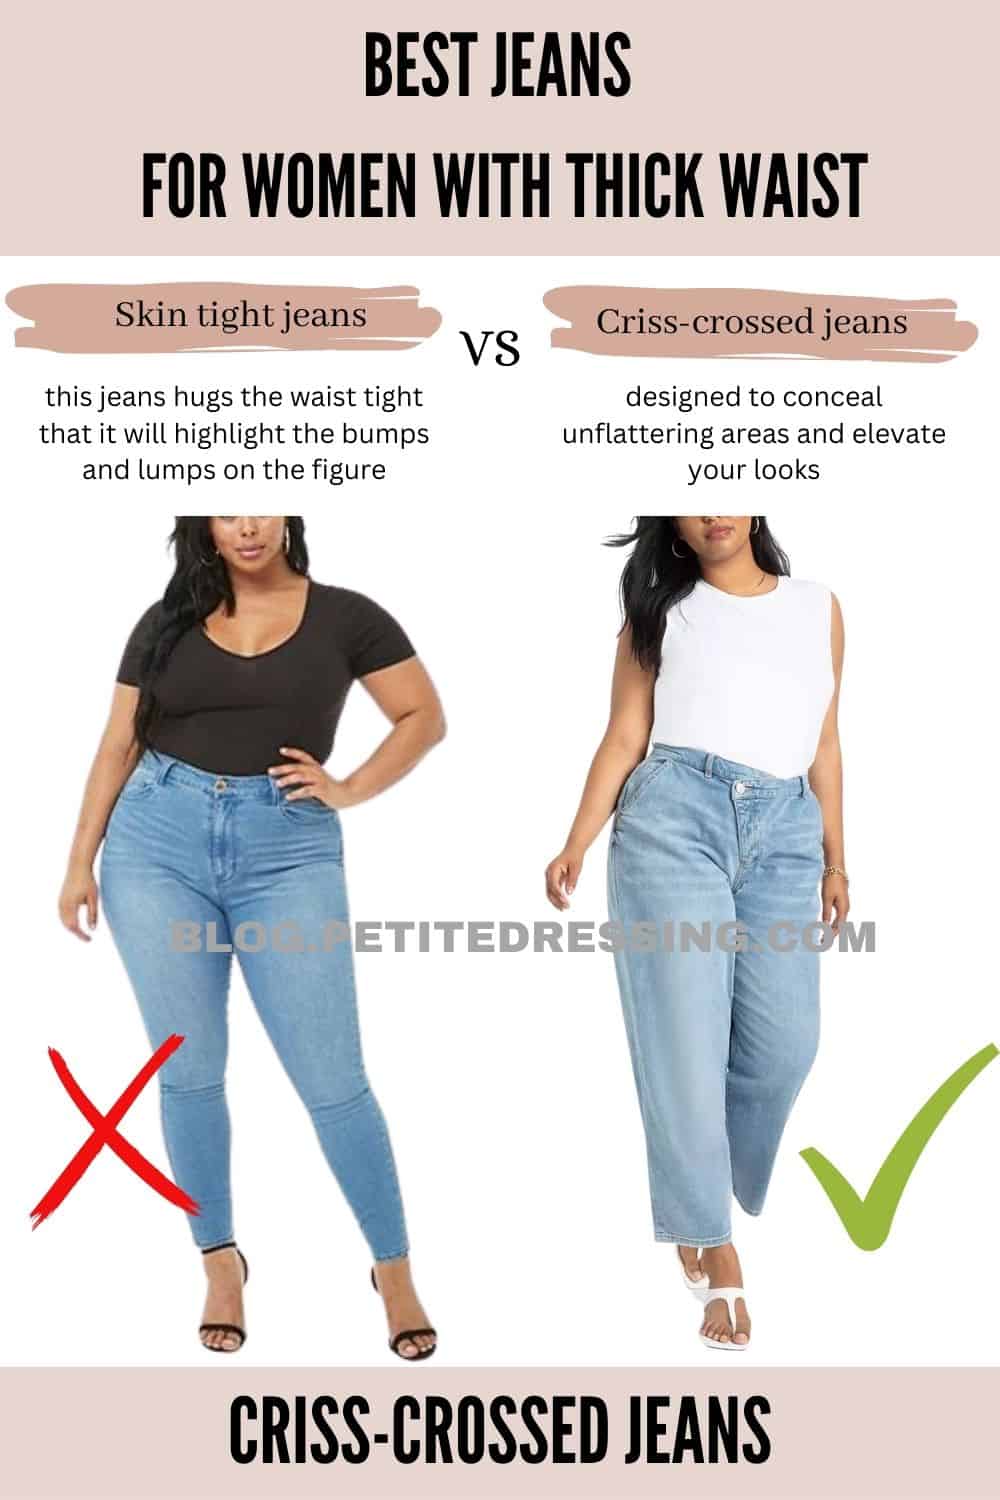 Comprehensive Jeans Guide for Women with a Thick Waist